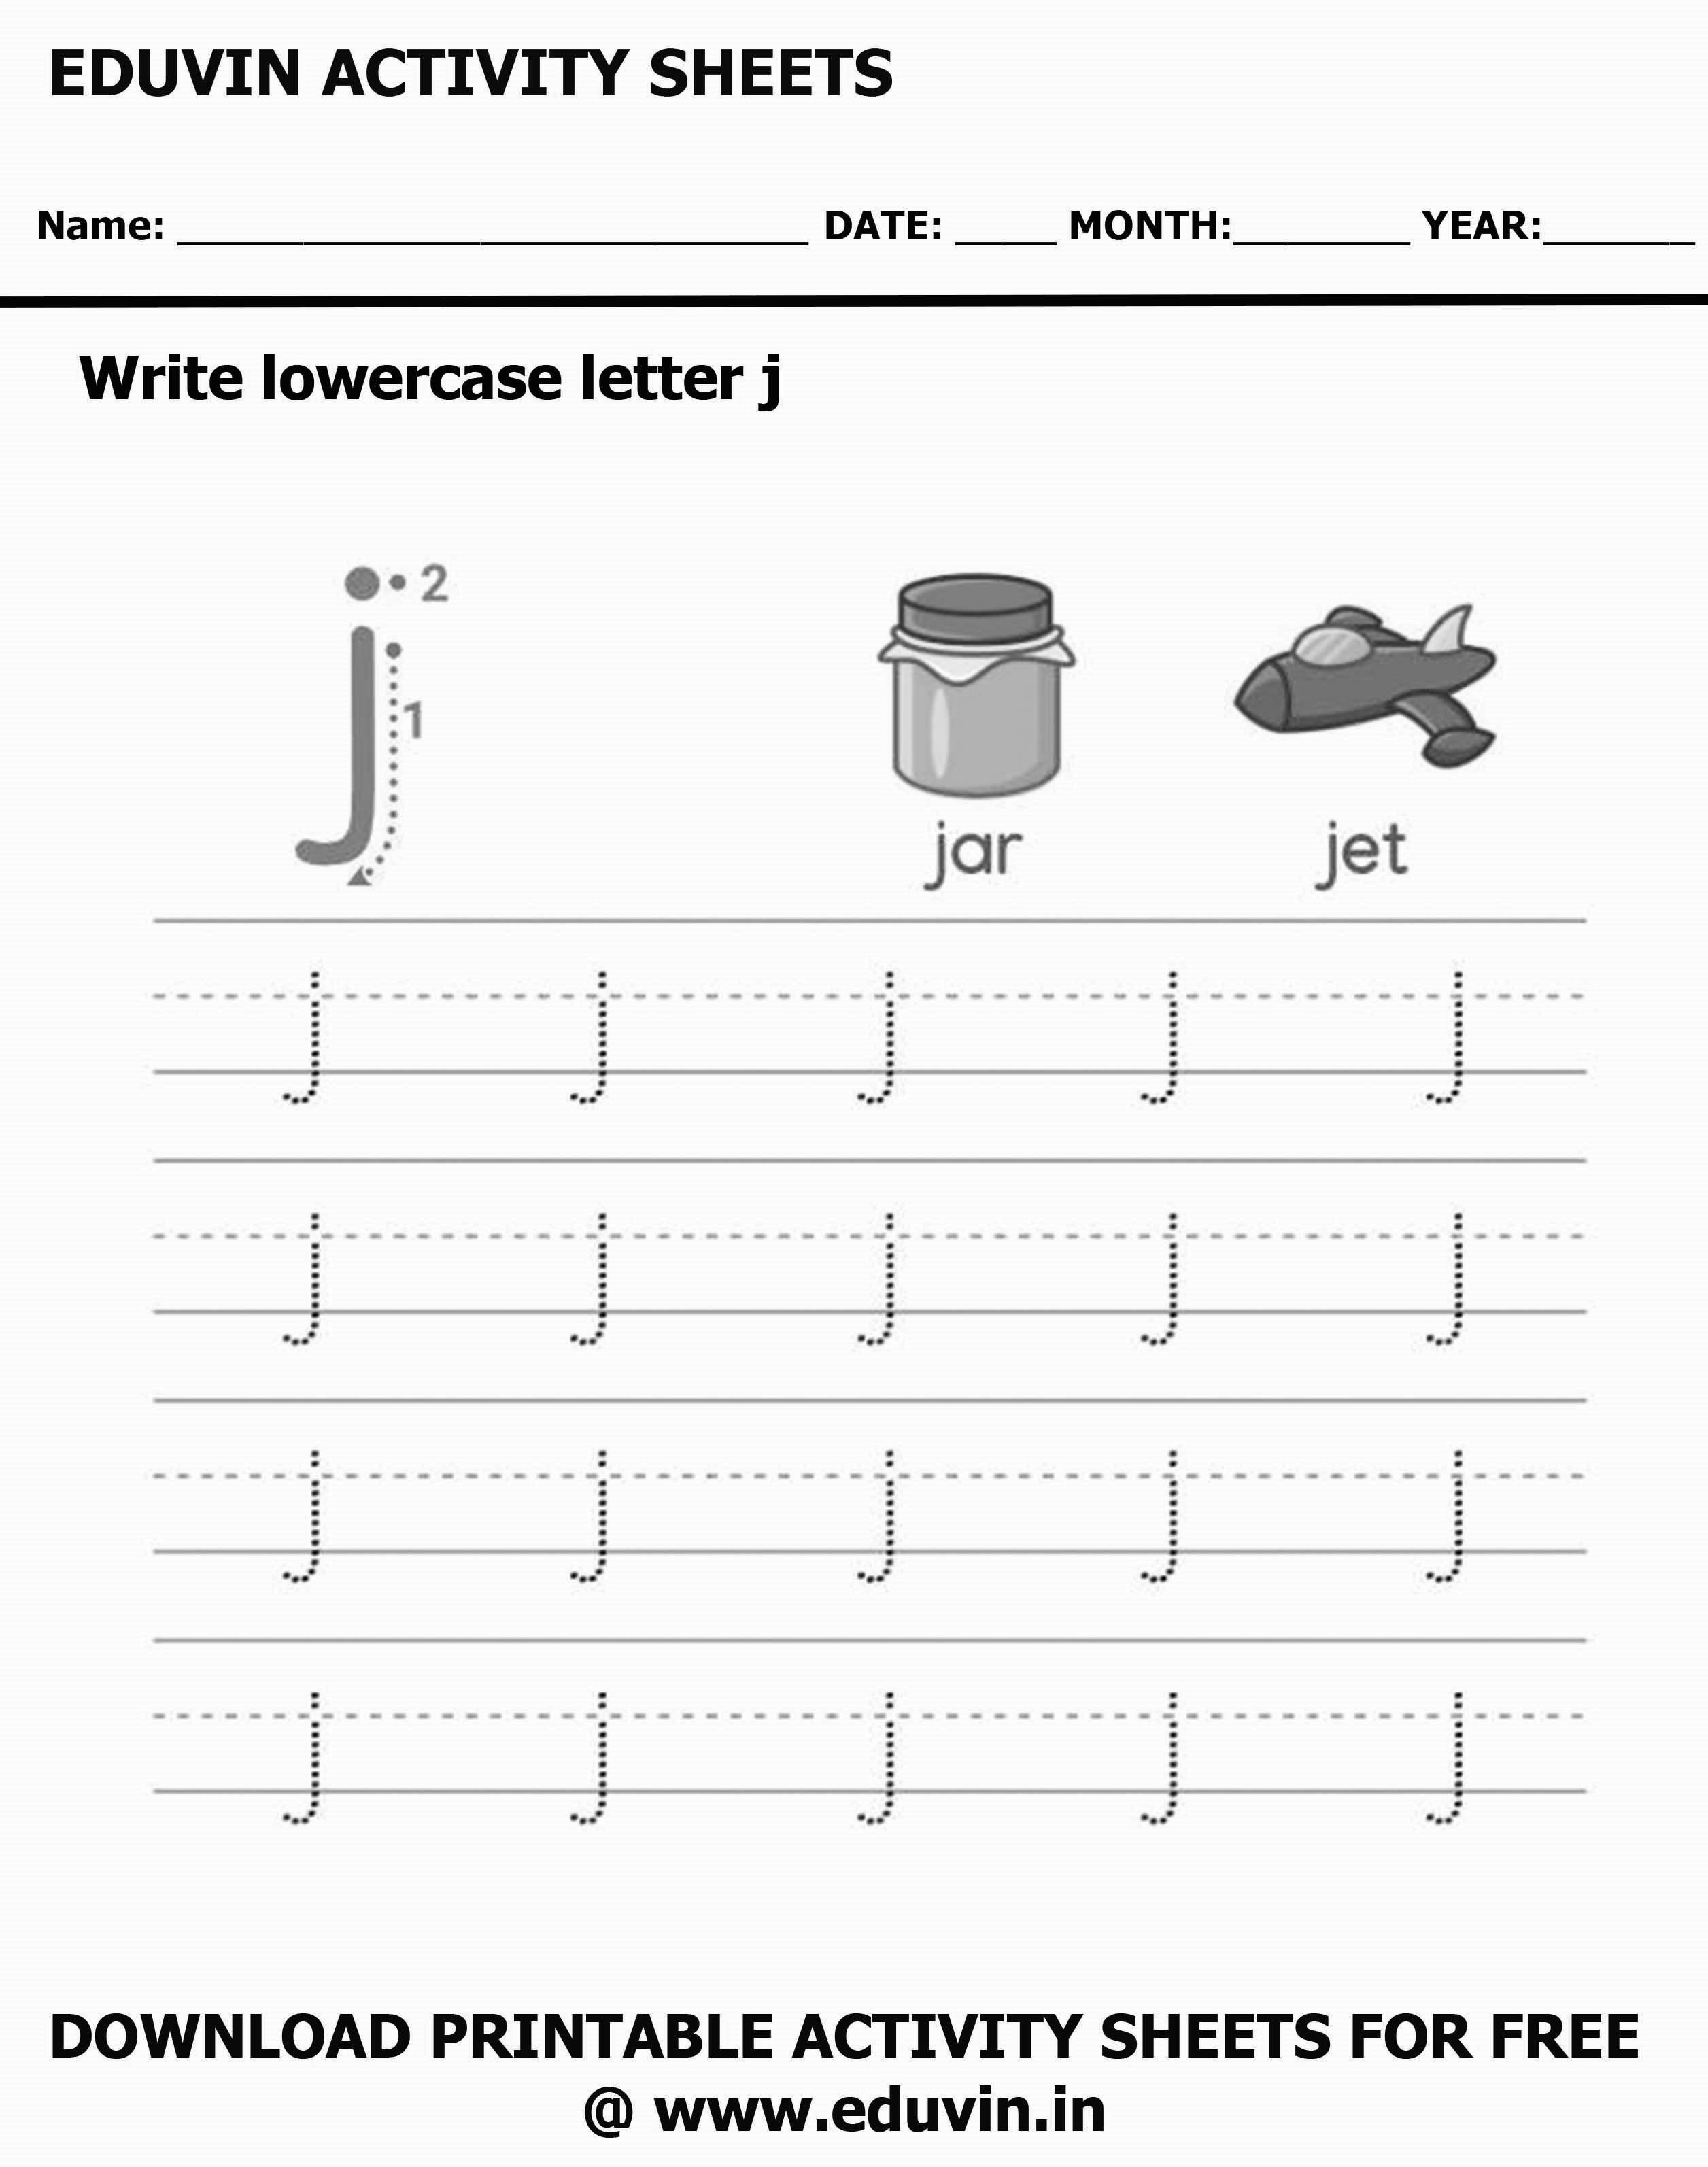 Lowercase Alphabet j Worksheets | Letter j Trace and Write Activity Sheet For Tracing and Letter Writing For Kids